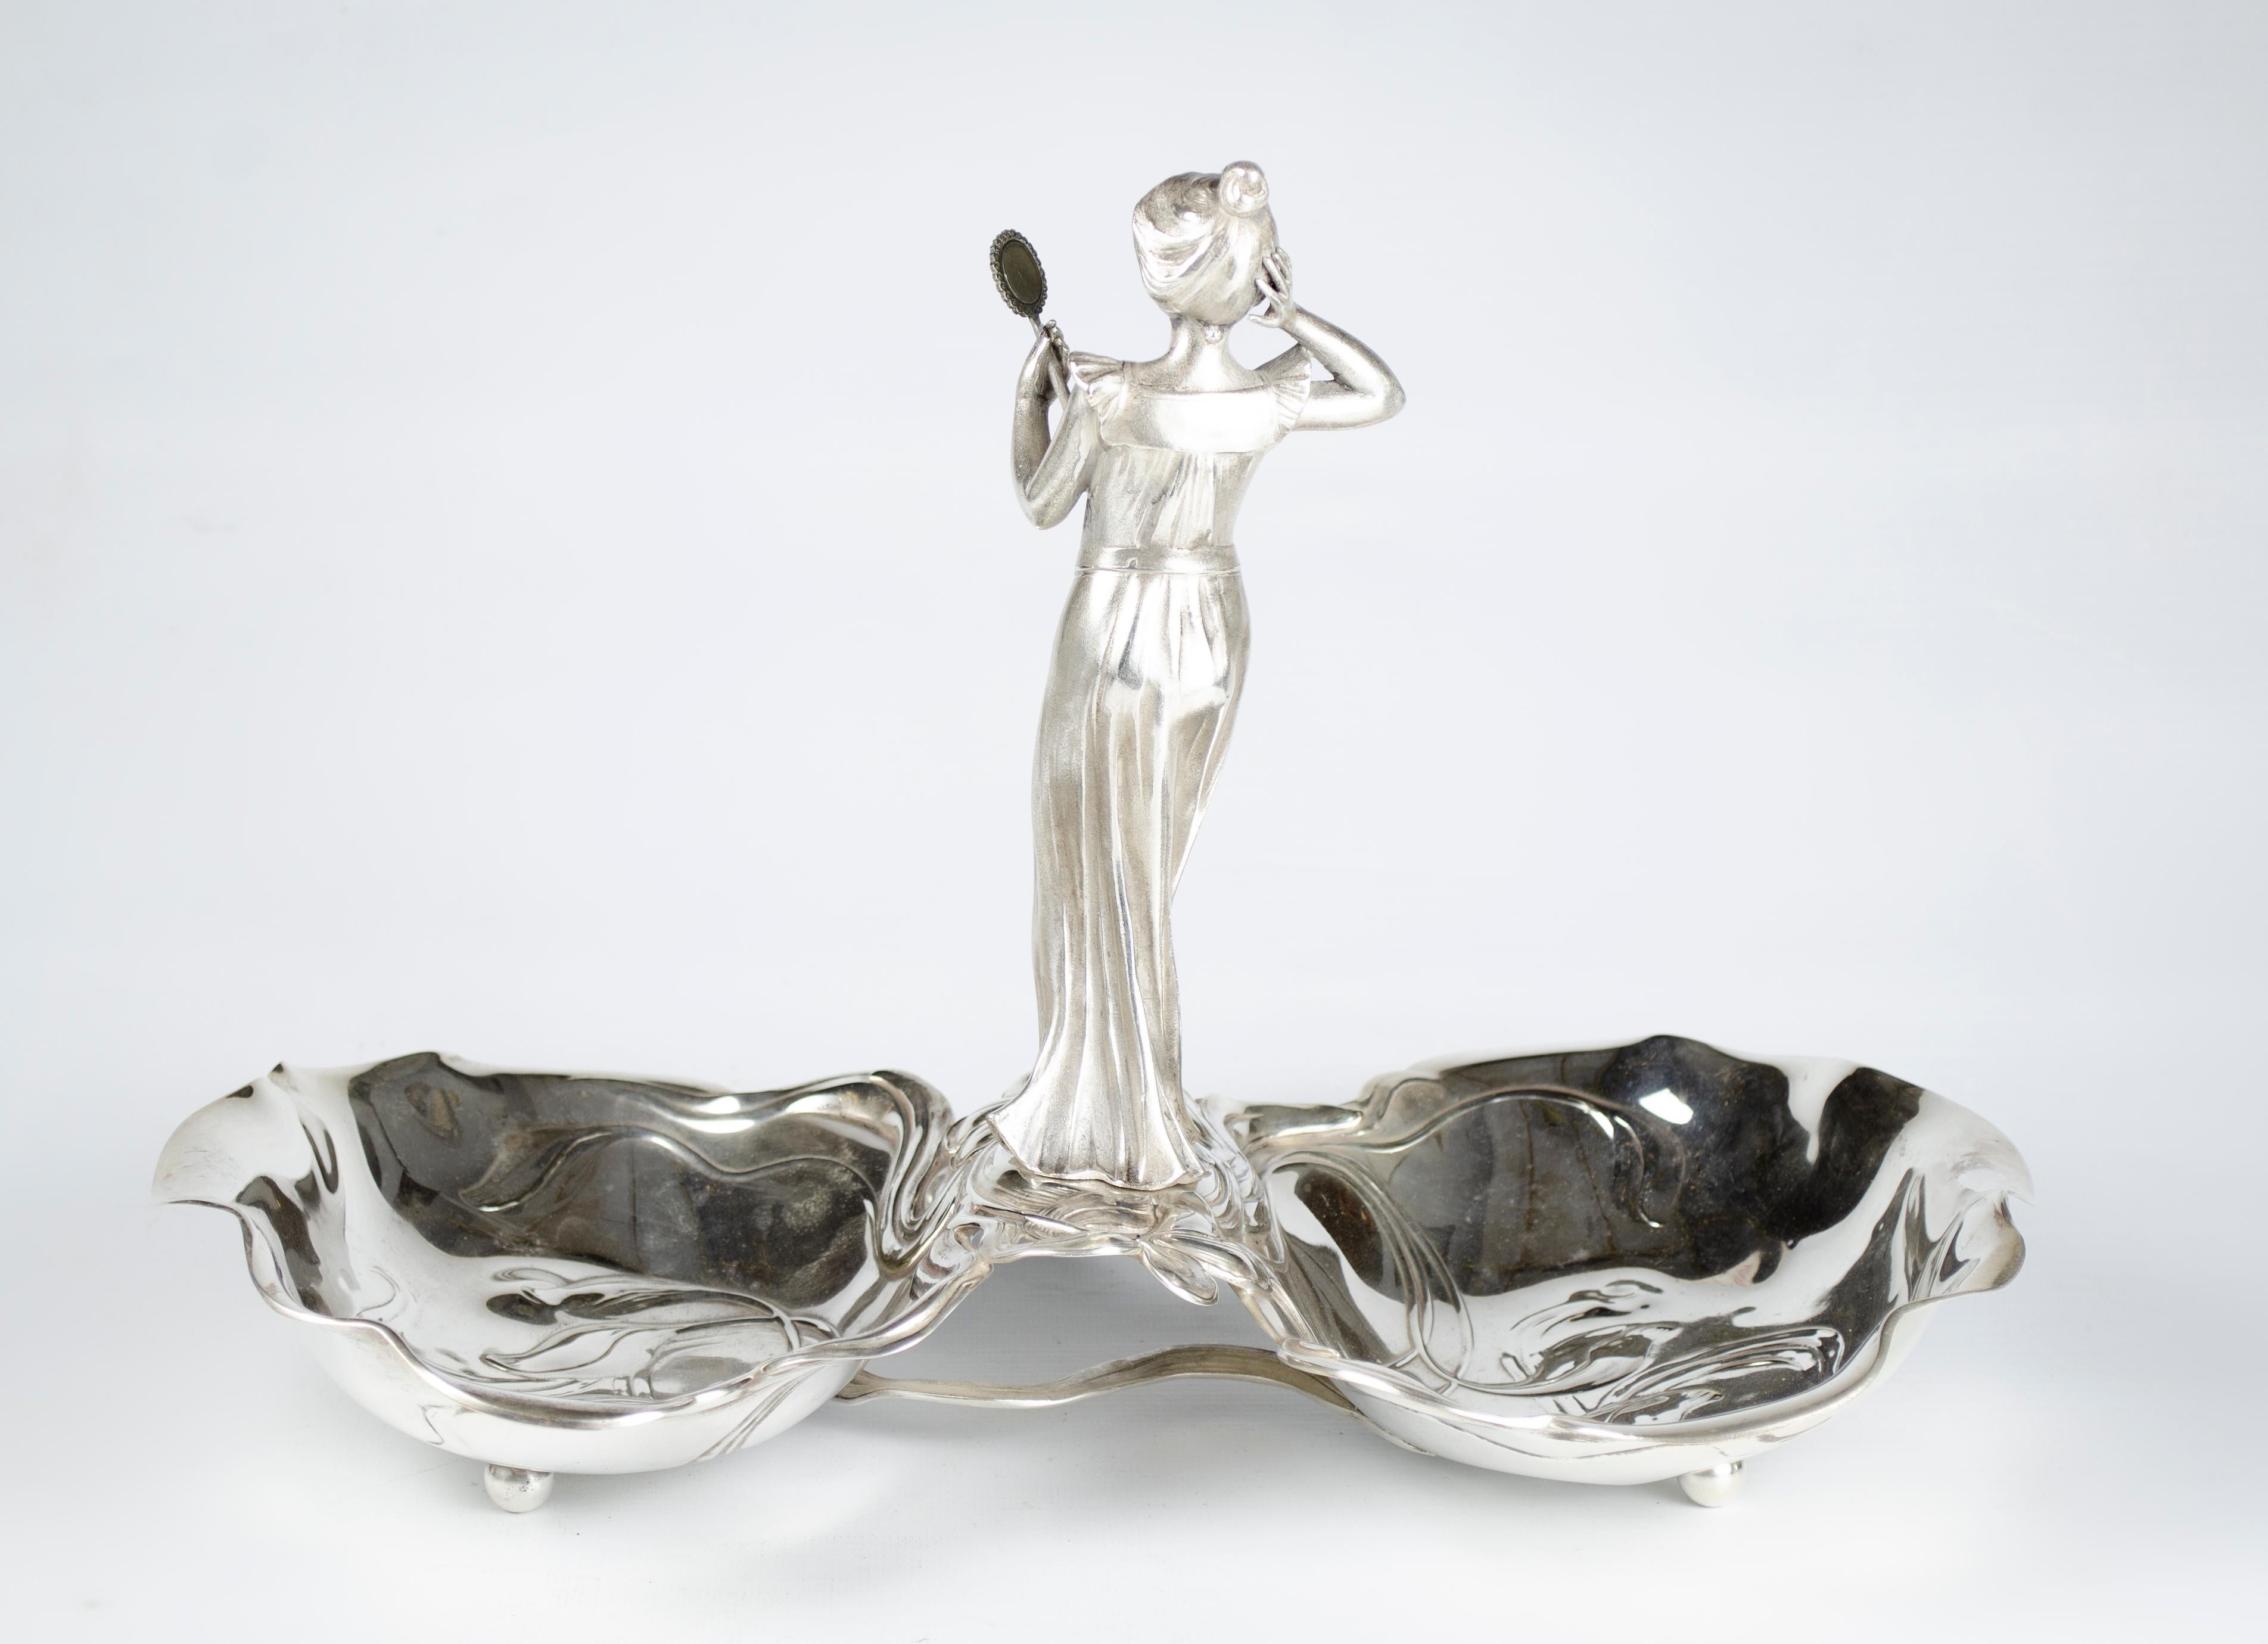 Art Nouveau jewelry dish.
Origin Germany circa 1920.
Perfect condition.
Electro silver technique.
Sealed by WMF and by Bazar Paris Bs As.
Art nouveau, modernist art or modernism was an international artistic and decorative movement, developed